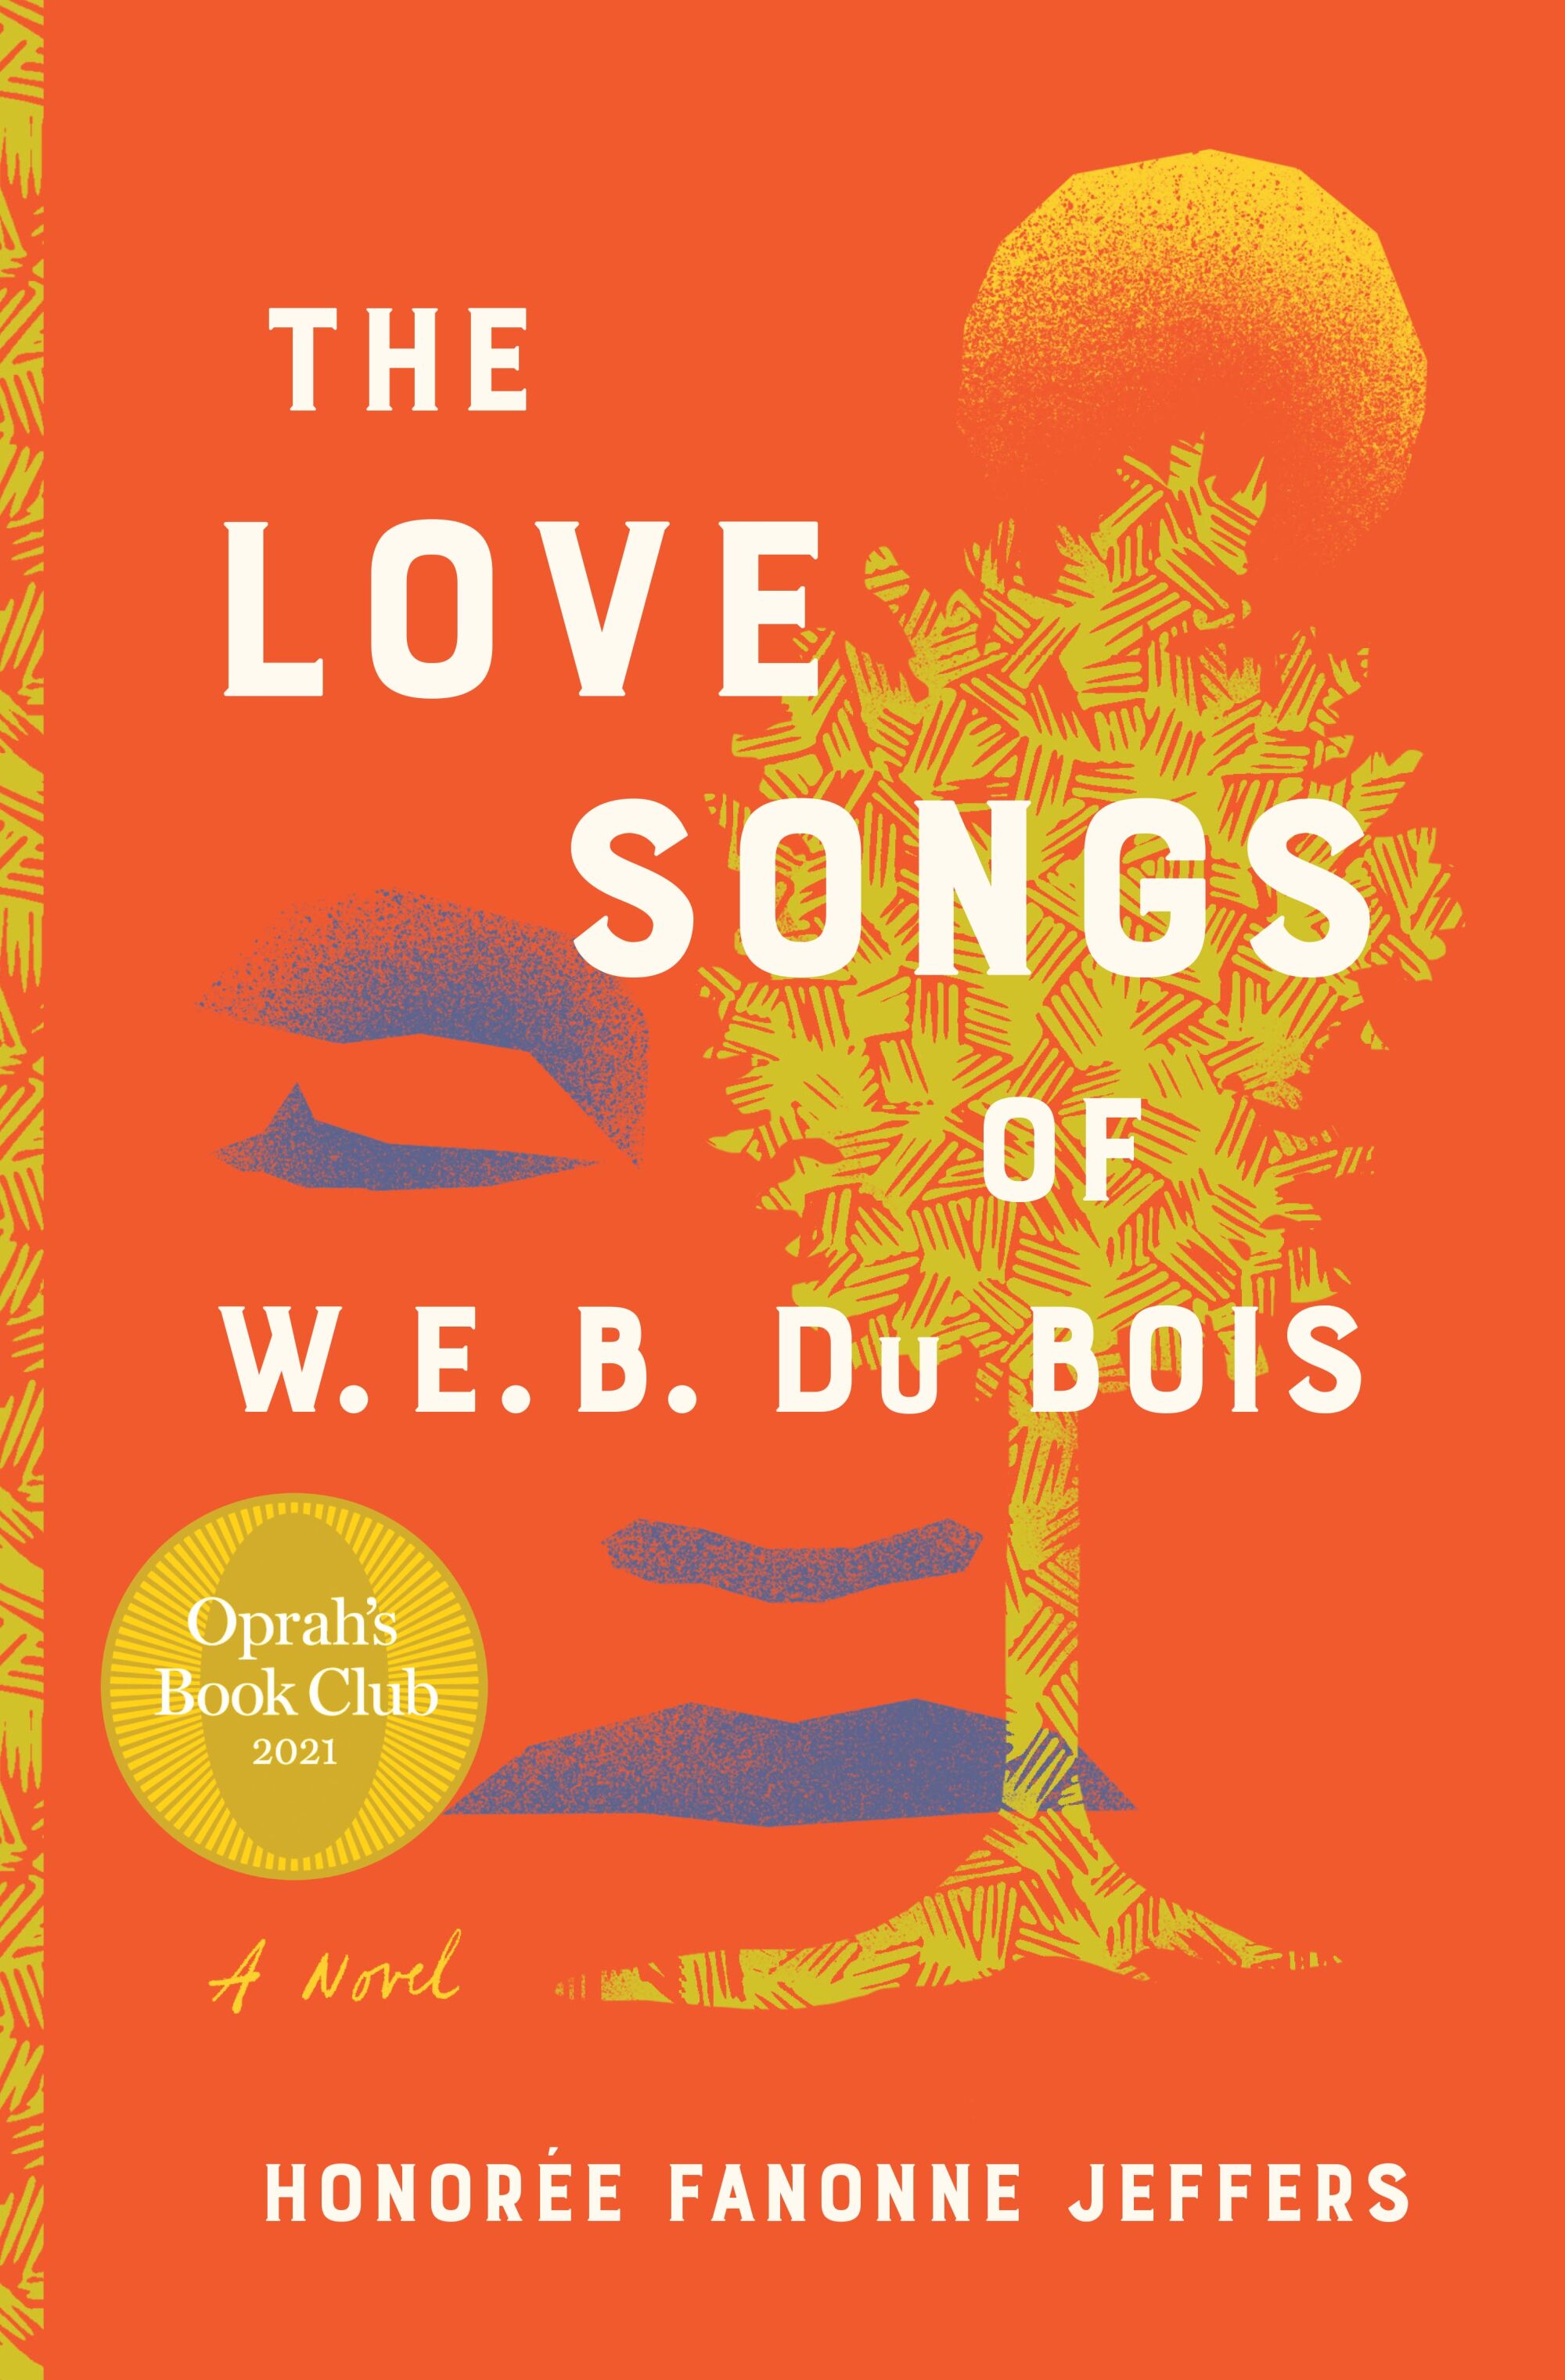 An image of a face and a tree on the cover of "The Love Songs of W.E.B. Du Bois," by Honorée Fanonne Jeffers